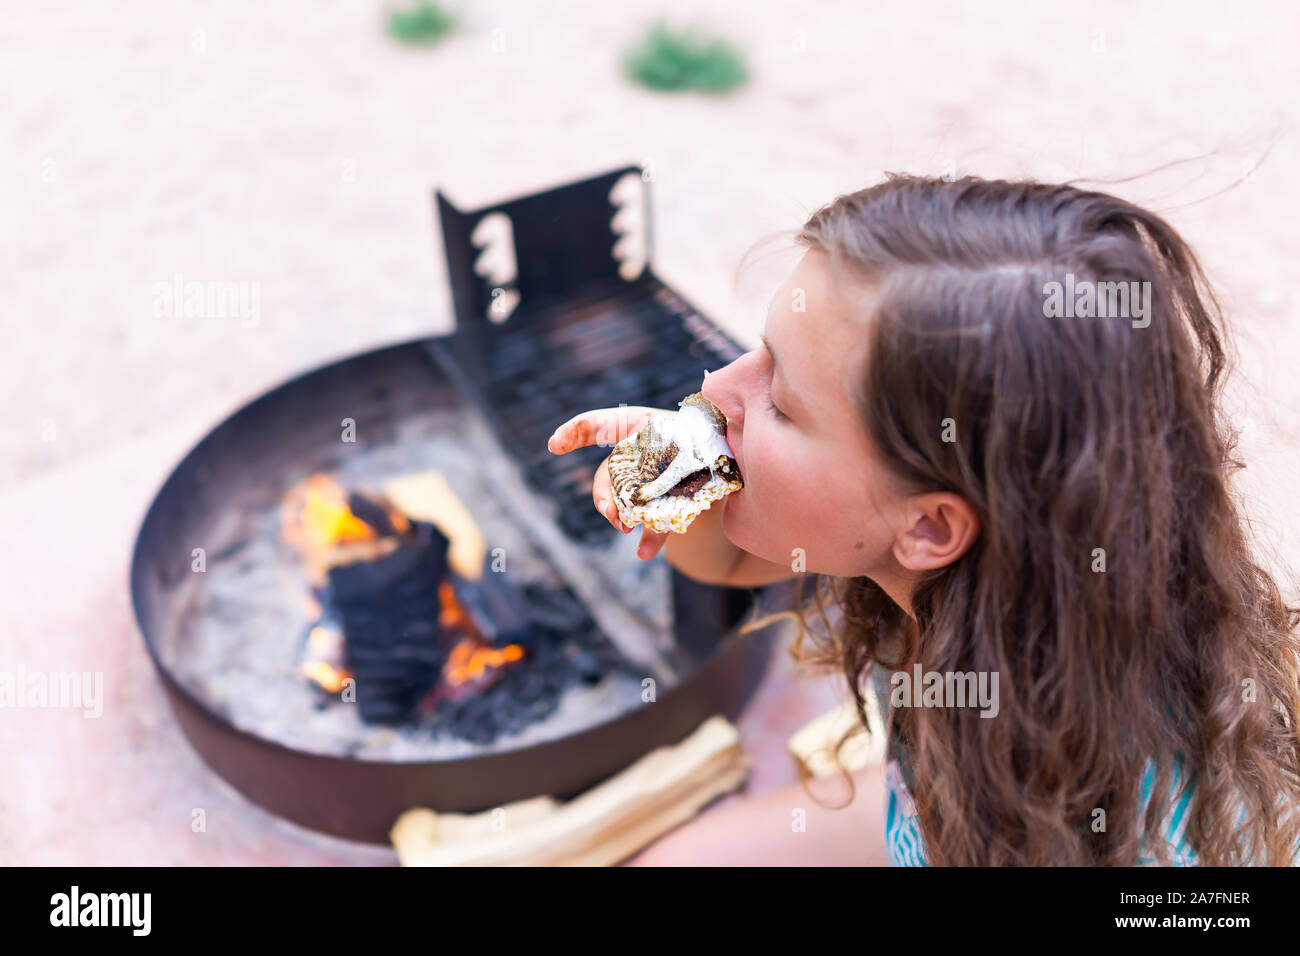 Young woman eating gooey roasted marshmallows smores with chocolate and rice cake cracker by fire in campground campfire grill Stock Photo